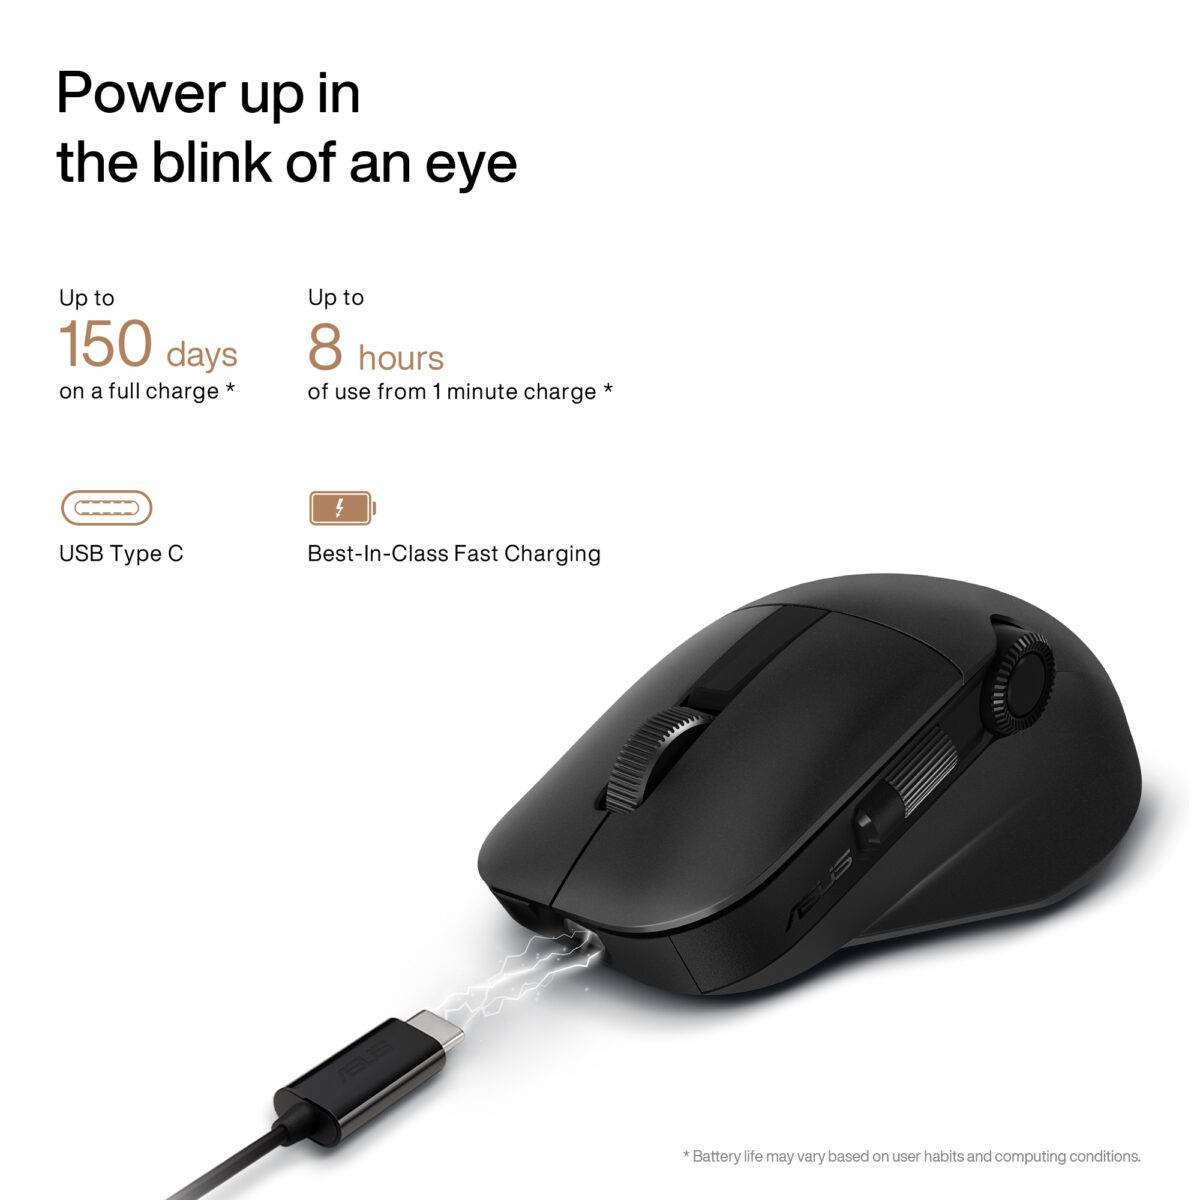 One-minute charge powers the mouse for up to 3 hours of heavy use or 8 hours of light use, and full charge powers mouse for up to 150 days *. *Minimum 4 mm glass thickness.